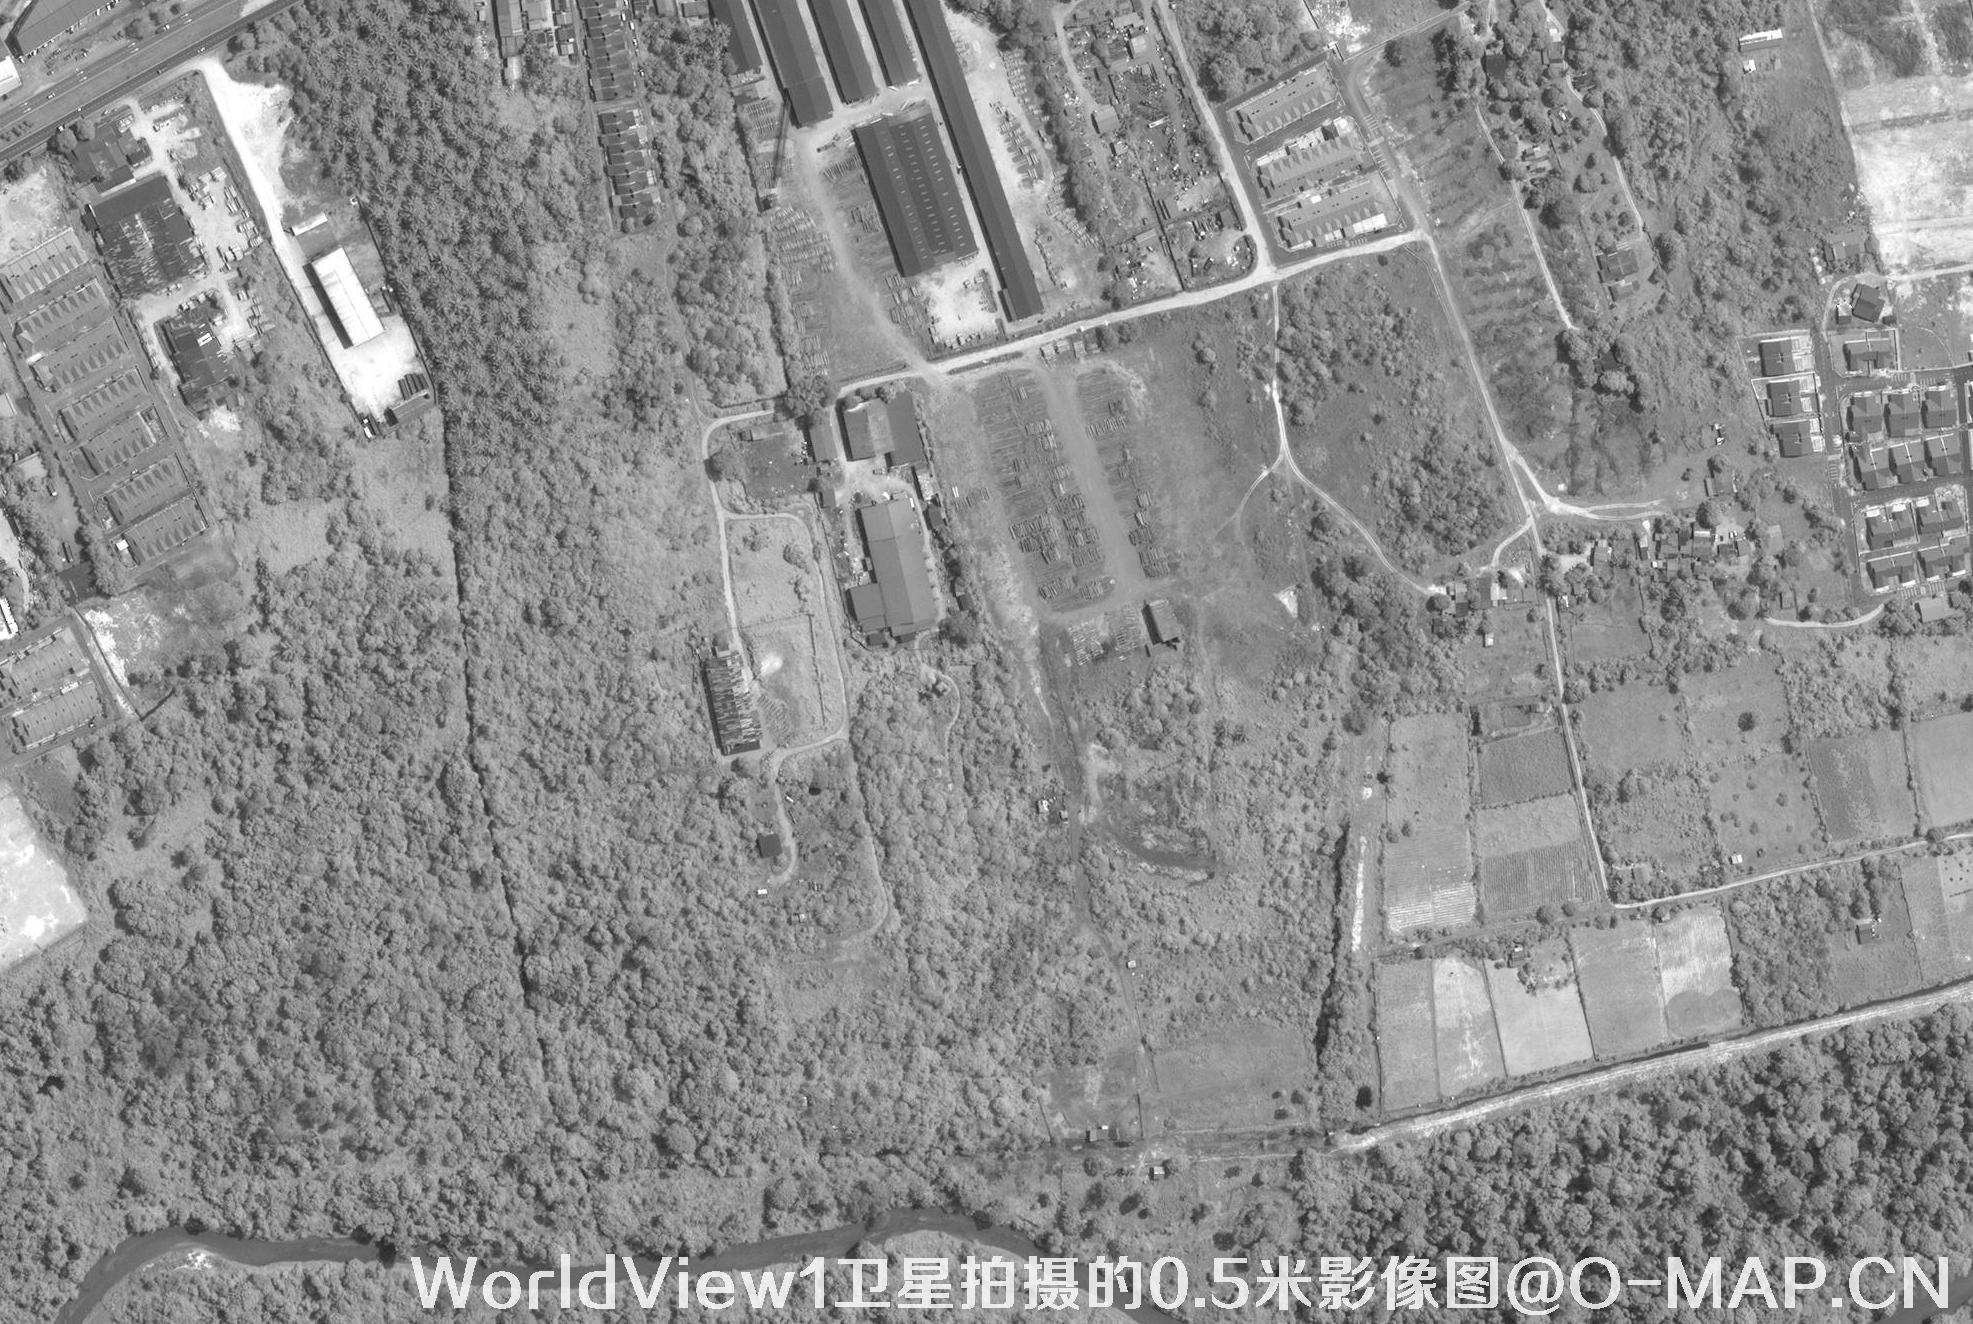 0.5-meter resolution image by WorldView1